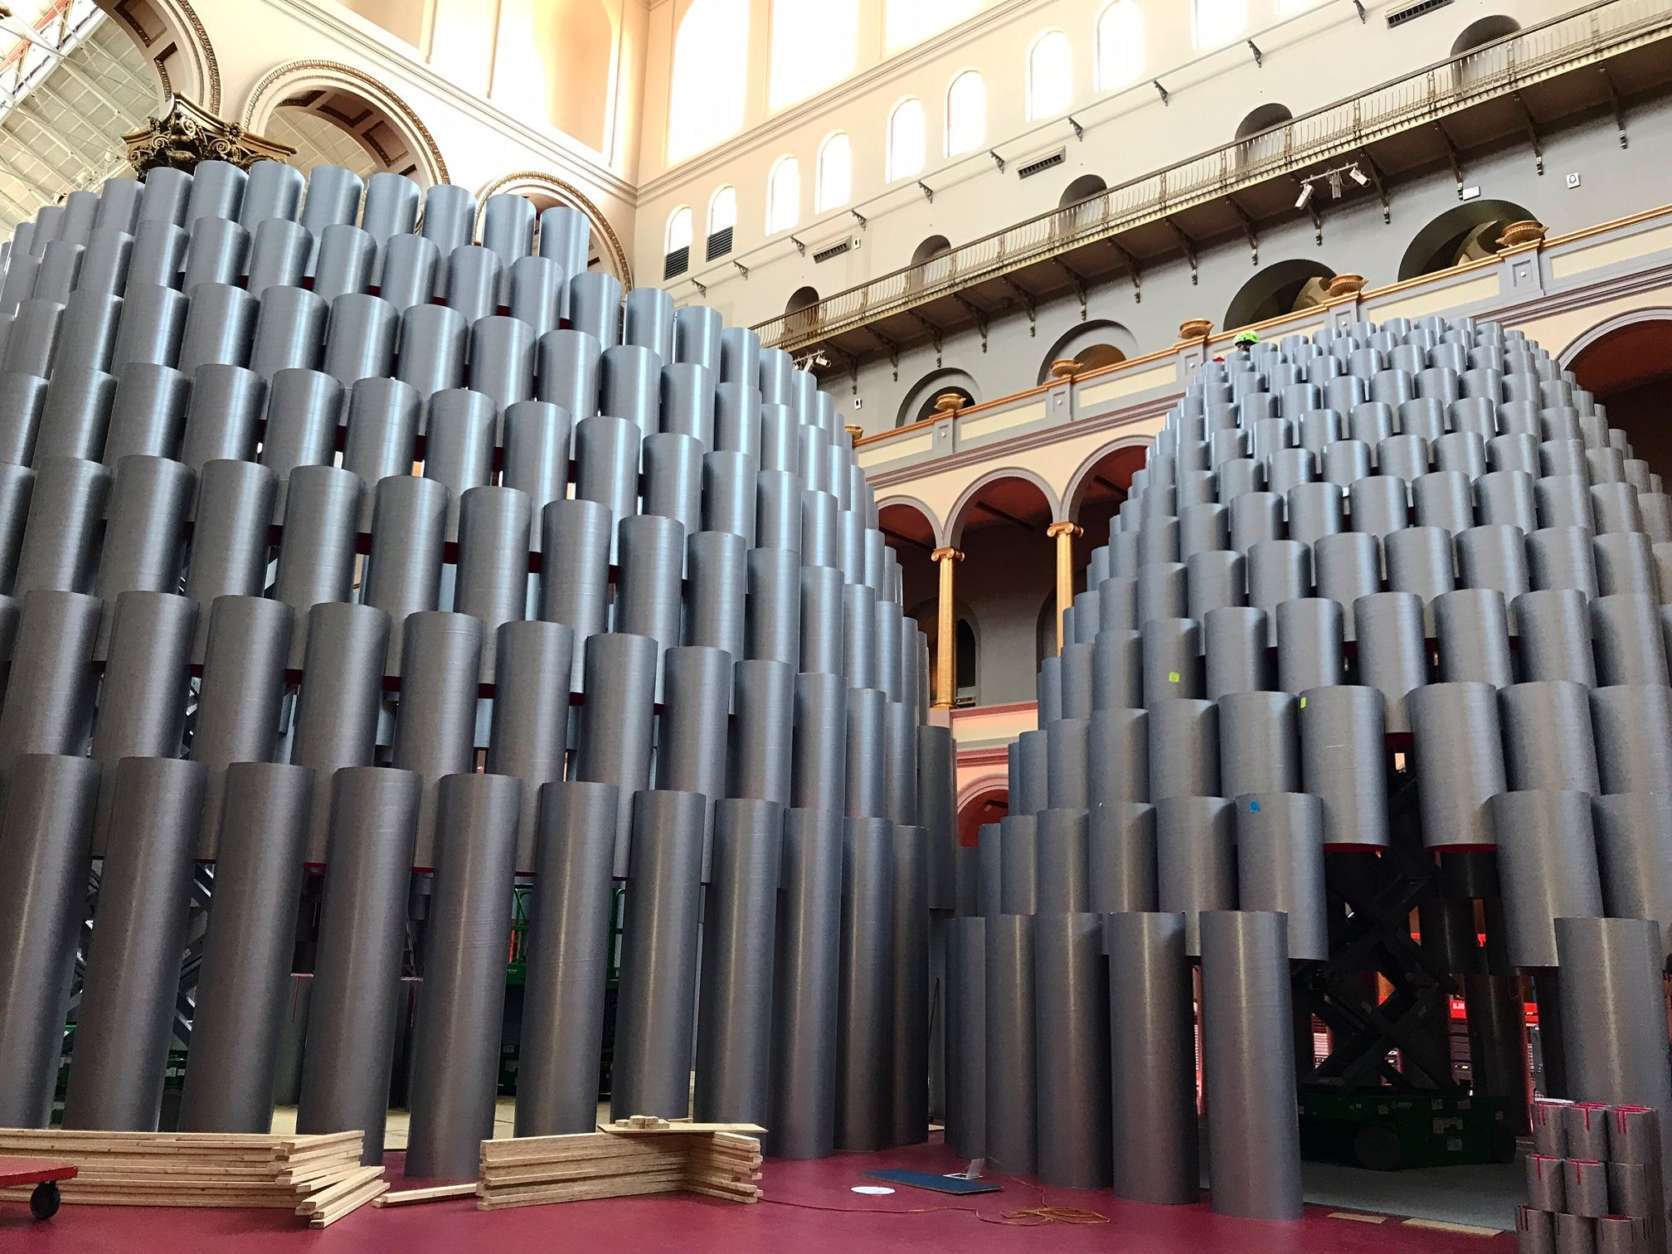 Similar to its predecessors, including ICEBERGS and BEACH, visitors will be encouraged to interact with the larger-than-life exhibit, which features three different sized chambers, all made from more than 2,700 stacked paper tubes. (WTOP/Rachel Nania)